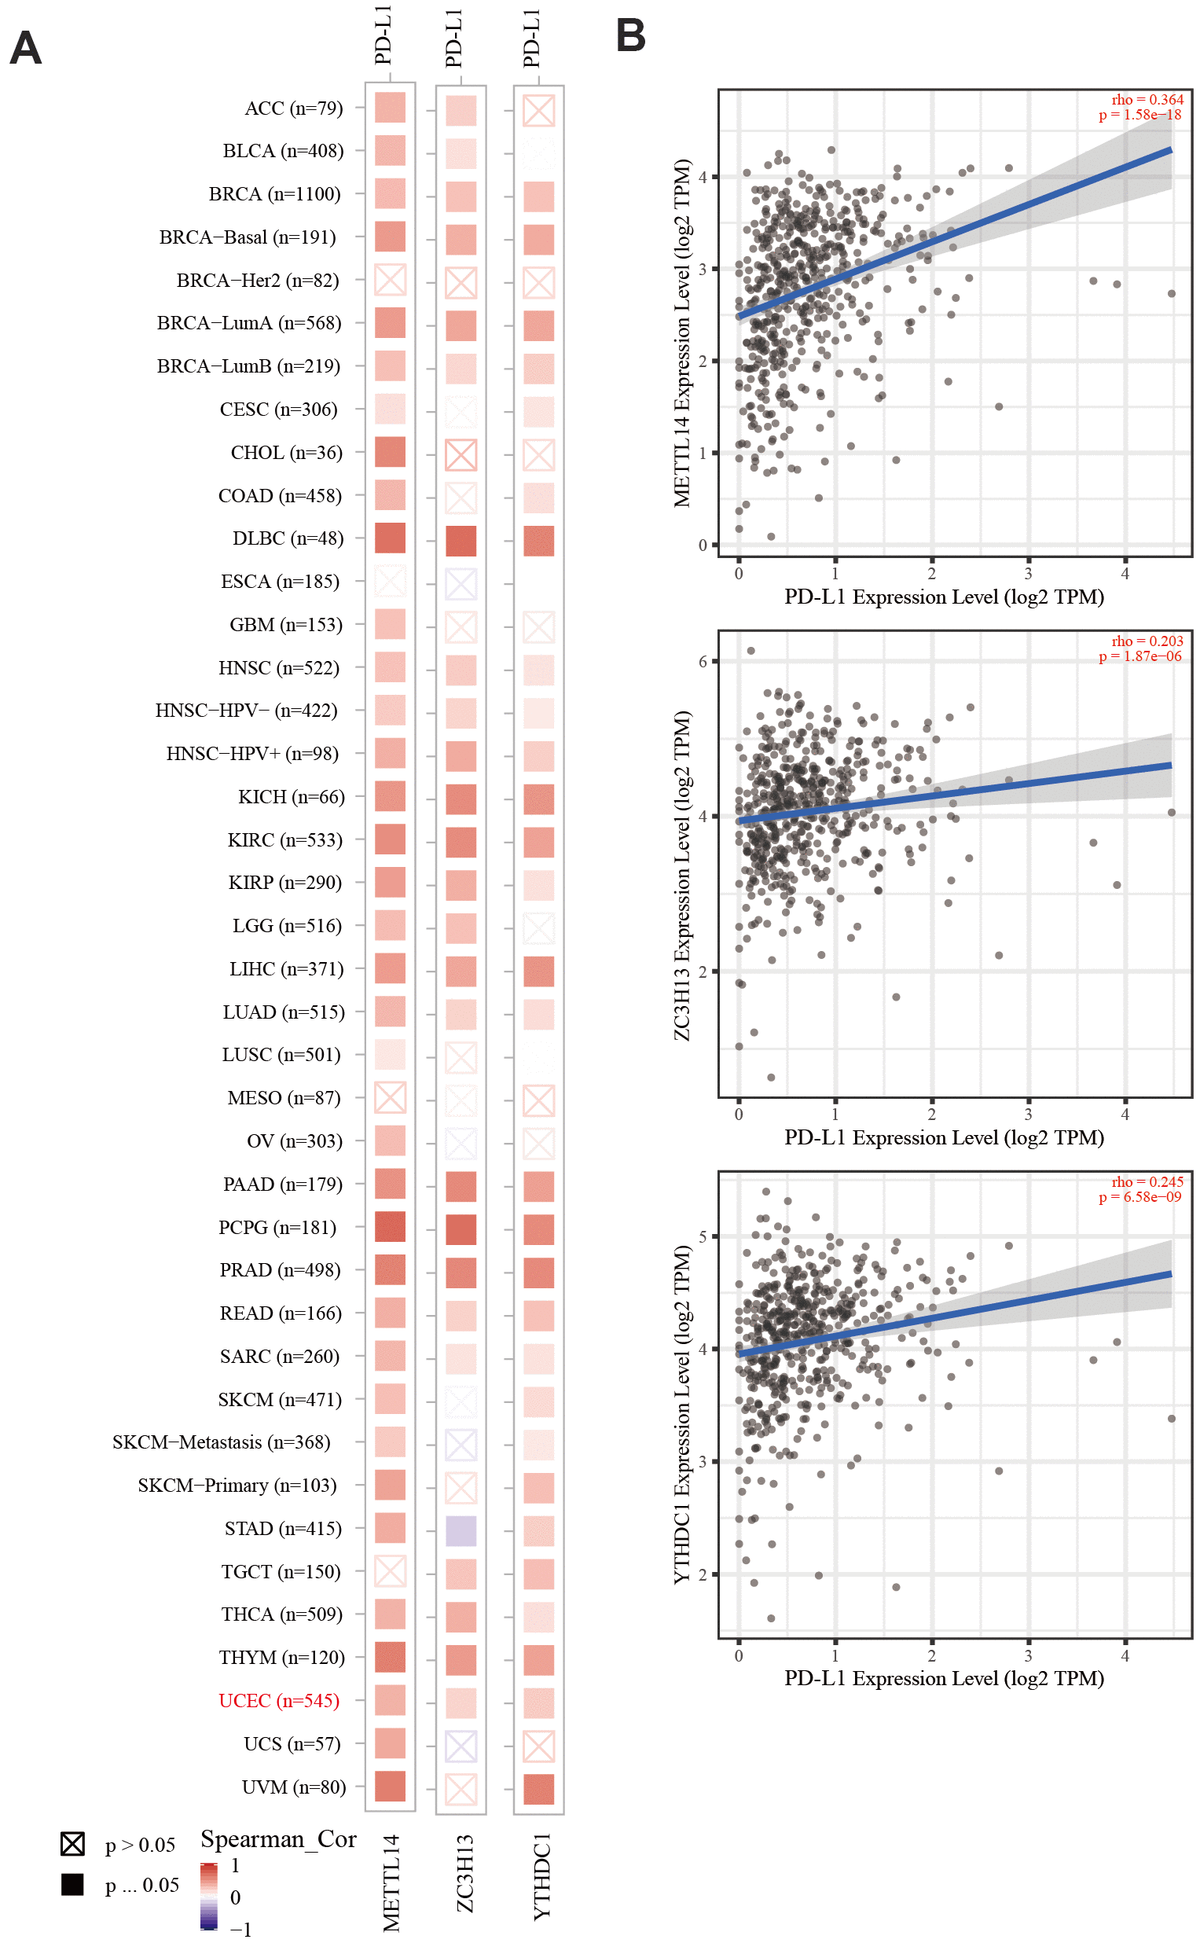 The correlation of METTL14, ZC3H13, and YTHDC1 expression with PD-L1. (A) Heatmap depicting the correlation of METTL14, ZC3H13, and YTHDC1 expression with PD-L1 in diverse cancer types. (B) Spearman’s correlation analysis was employed.